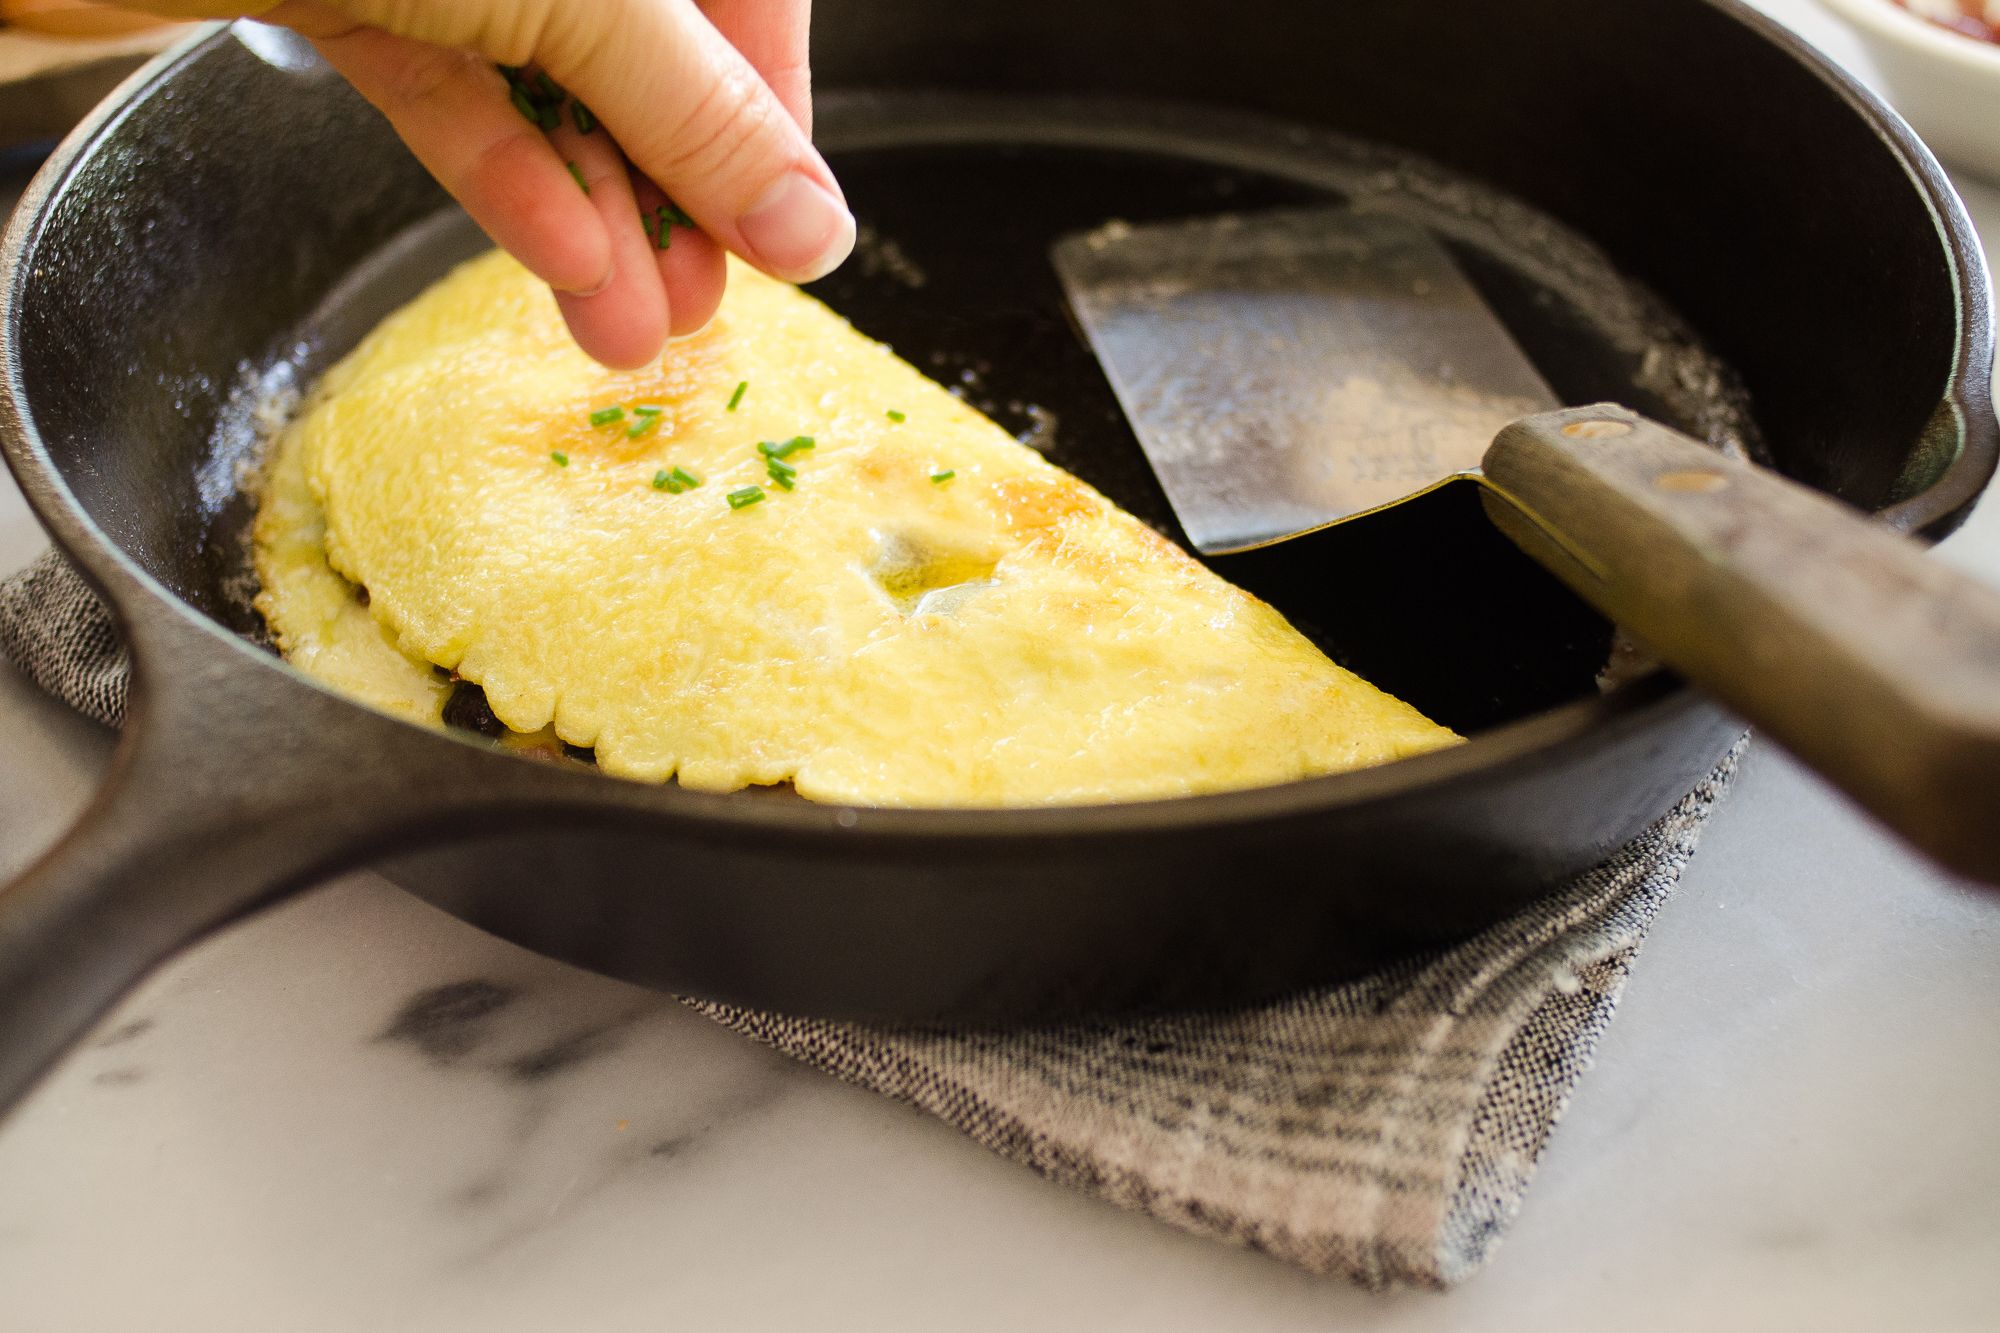 https://hips.hearstapps.com/thepioneerwoman/wp-content/uploads/2016/10/how-to-make-an-omelette-13.jpg